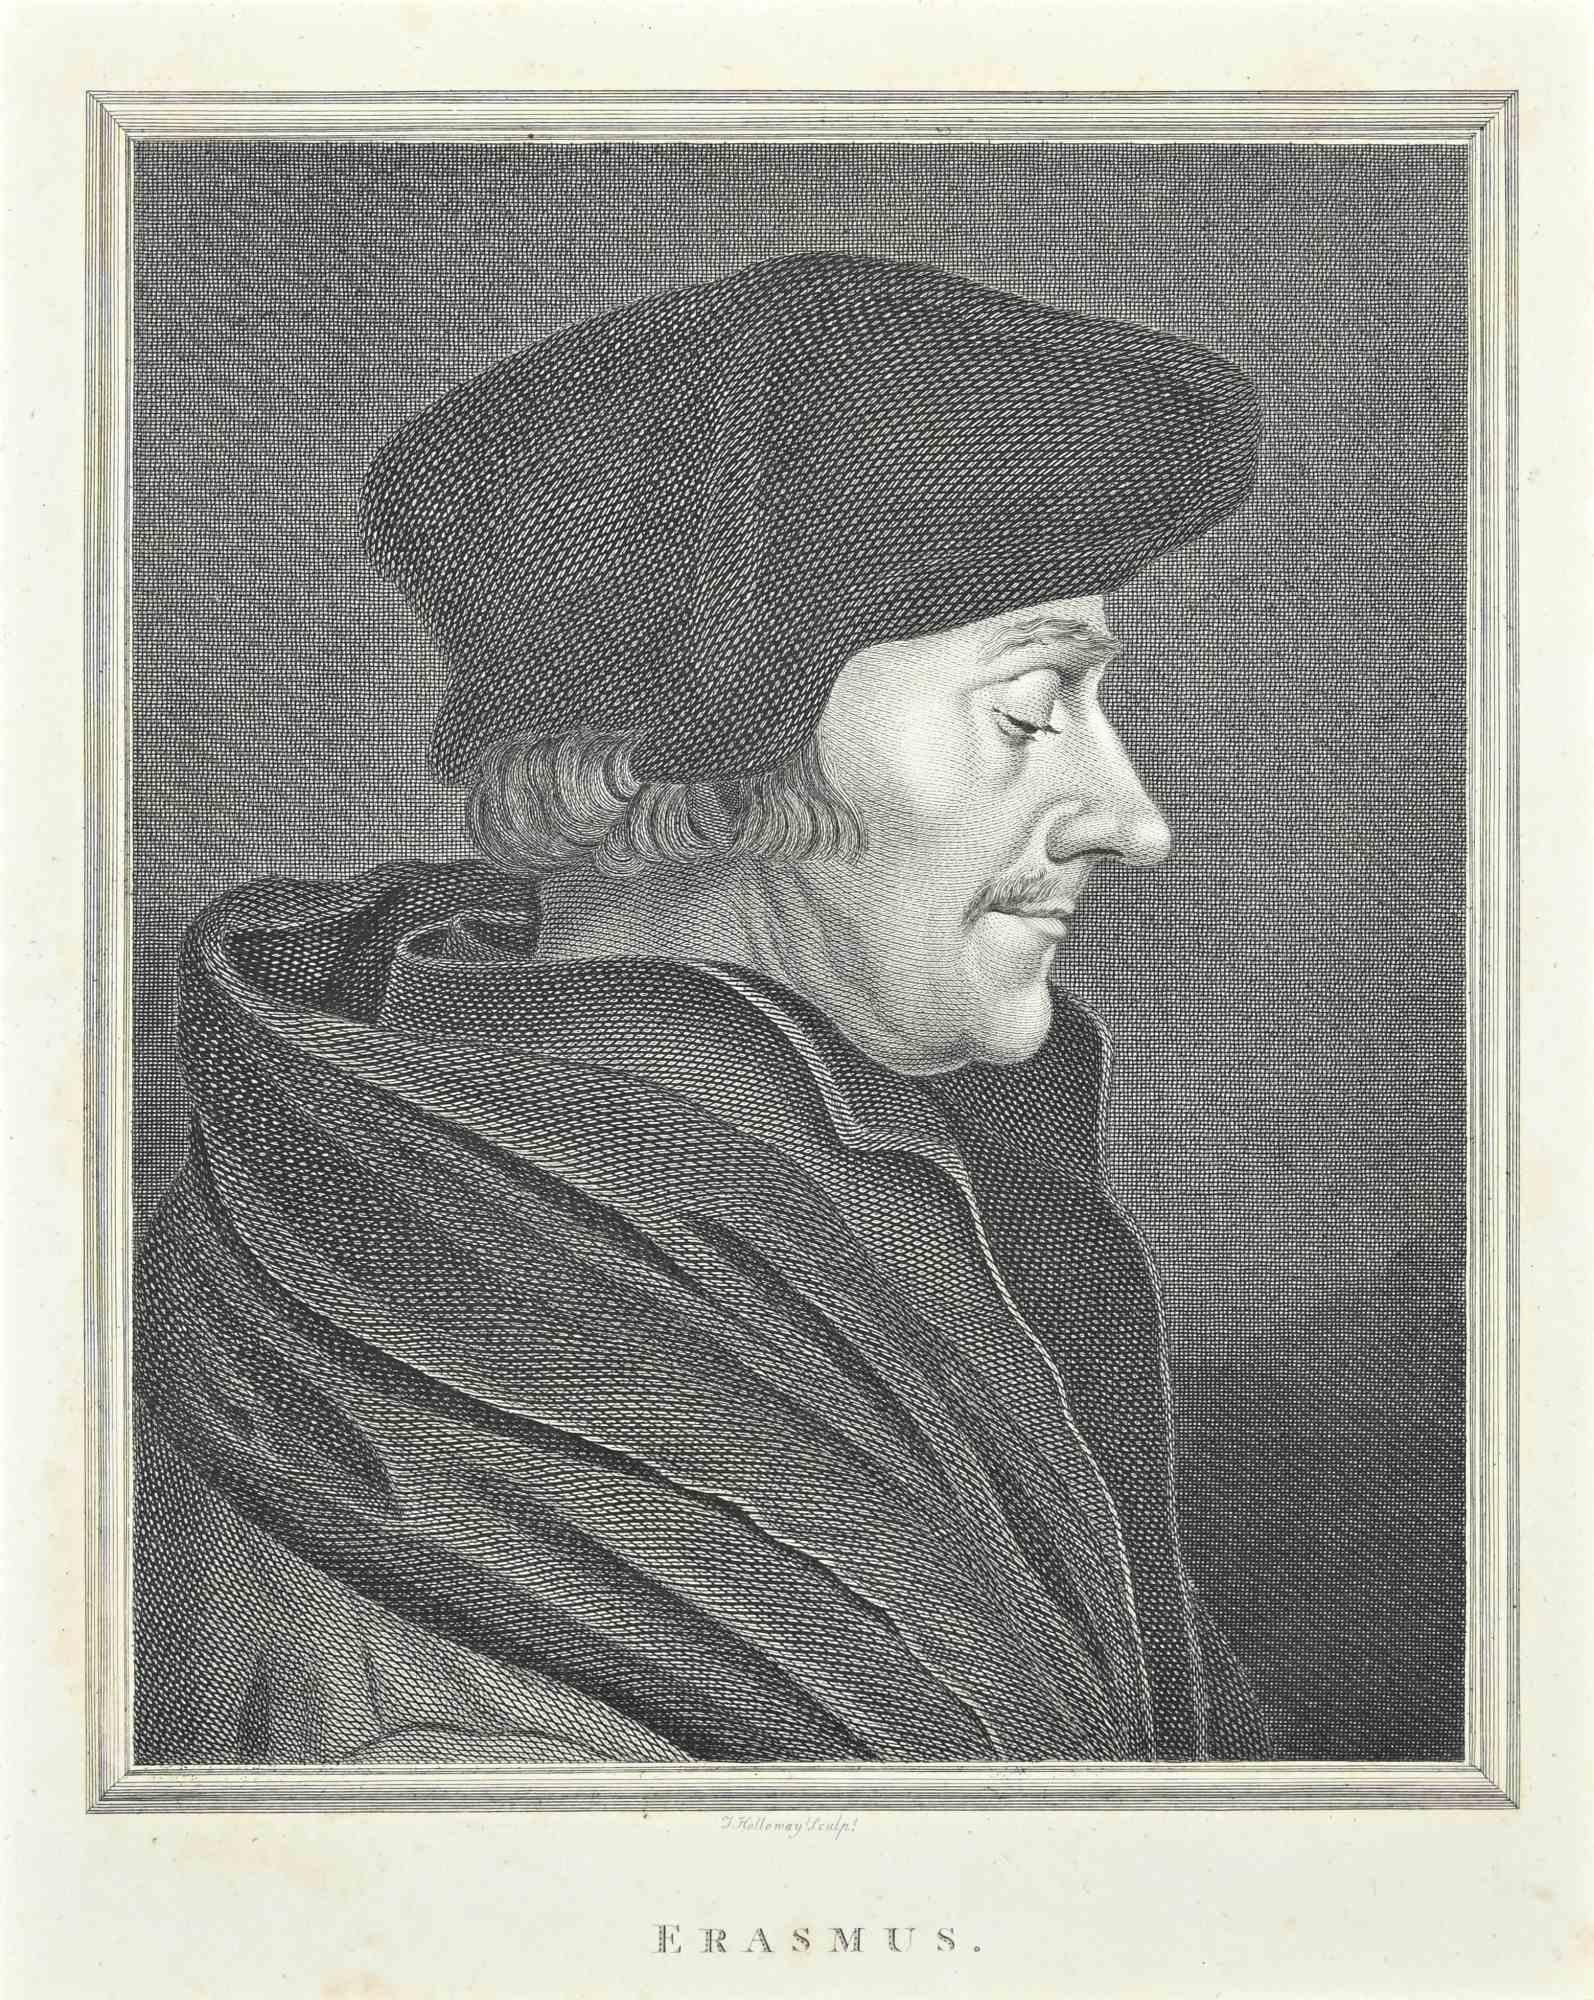 Portrait of Erasmus is an original etching artwork realized by Thomas Holloway for Johann Caspar Lavater's "Essays on Physiognomy, Designed to Promote the Knowledge and the Love of Mankind", London, Bensley, 1810. 

Signed on the plate.

Titled on